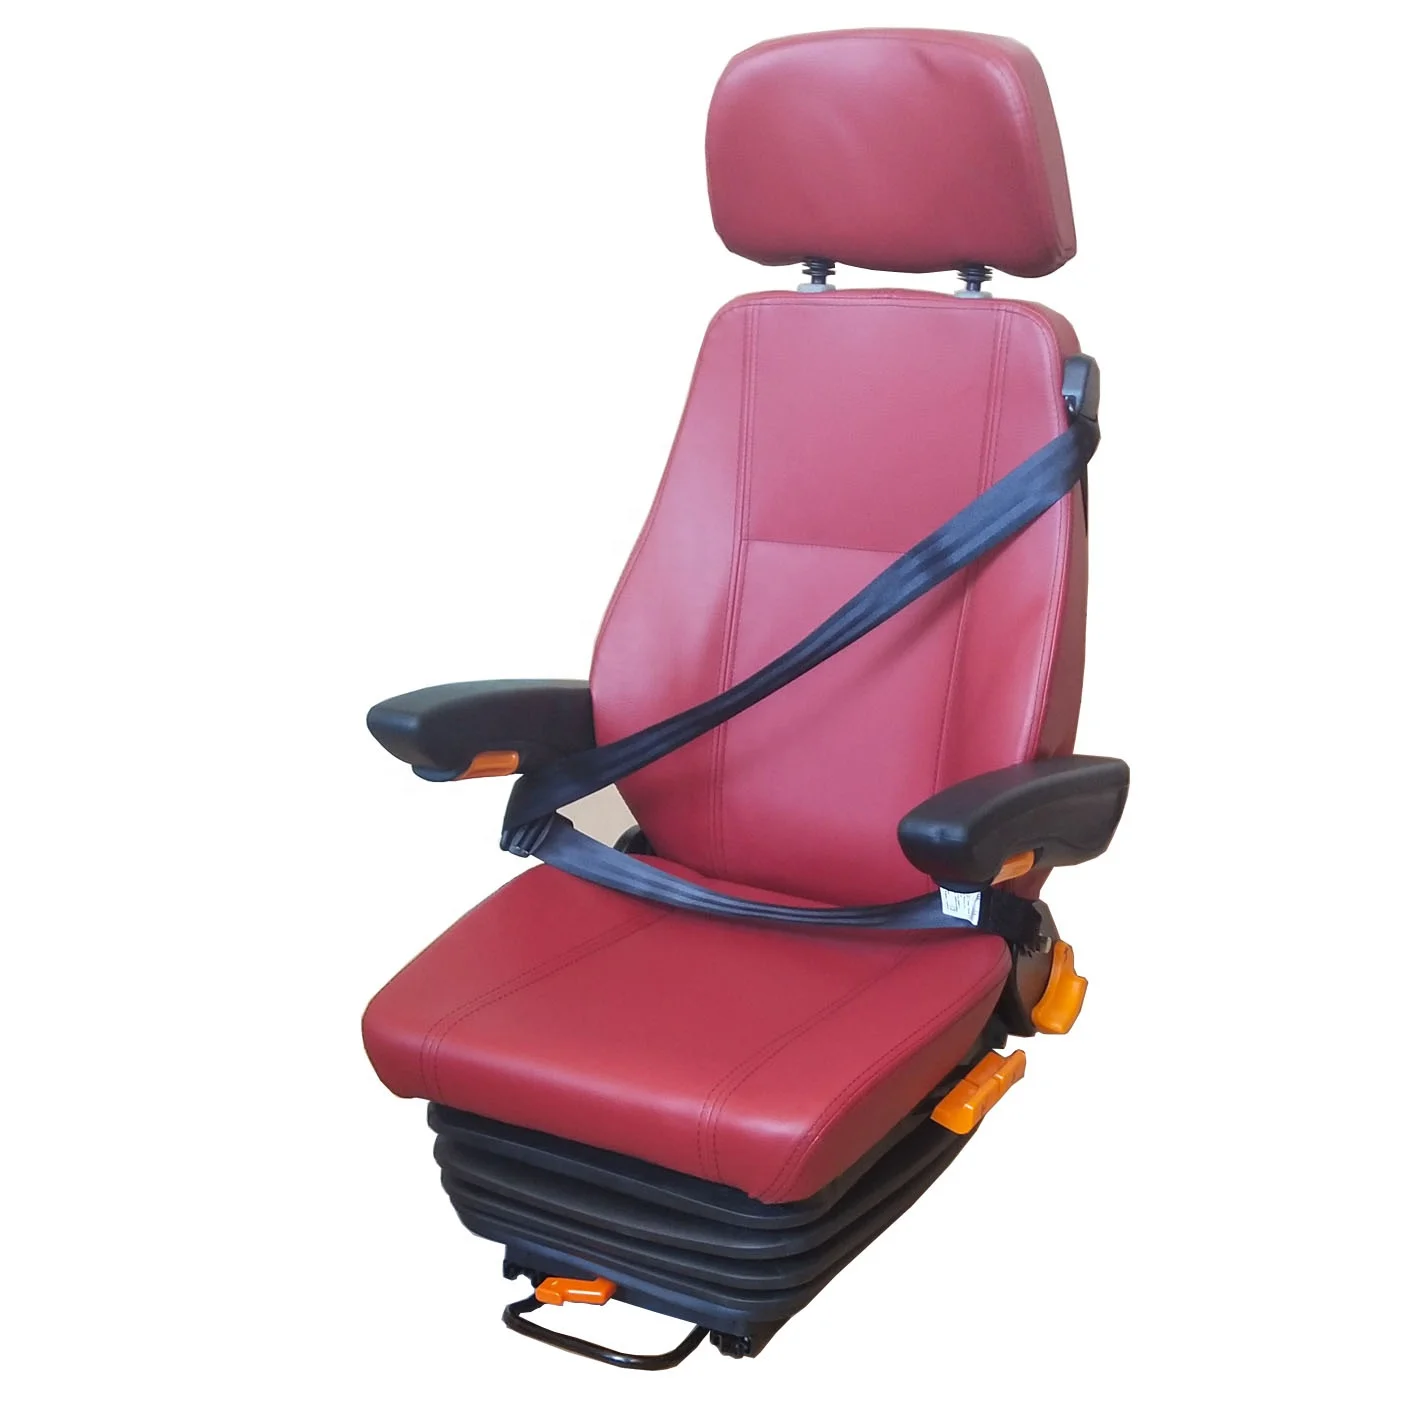 Pneumatic Suspension Bus Driver Seats Selling Hot in Vietnam Automobile  Seat Accessories   parts hot selling truck trailer parts landing gear hydraulic landing gear for trailer standing leg